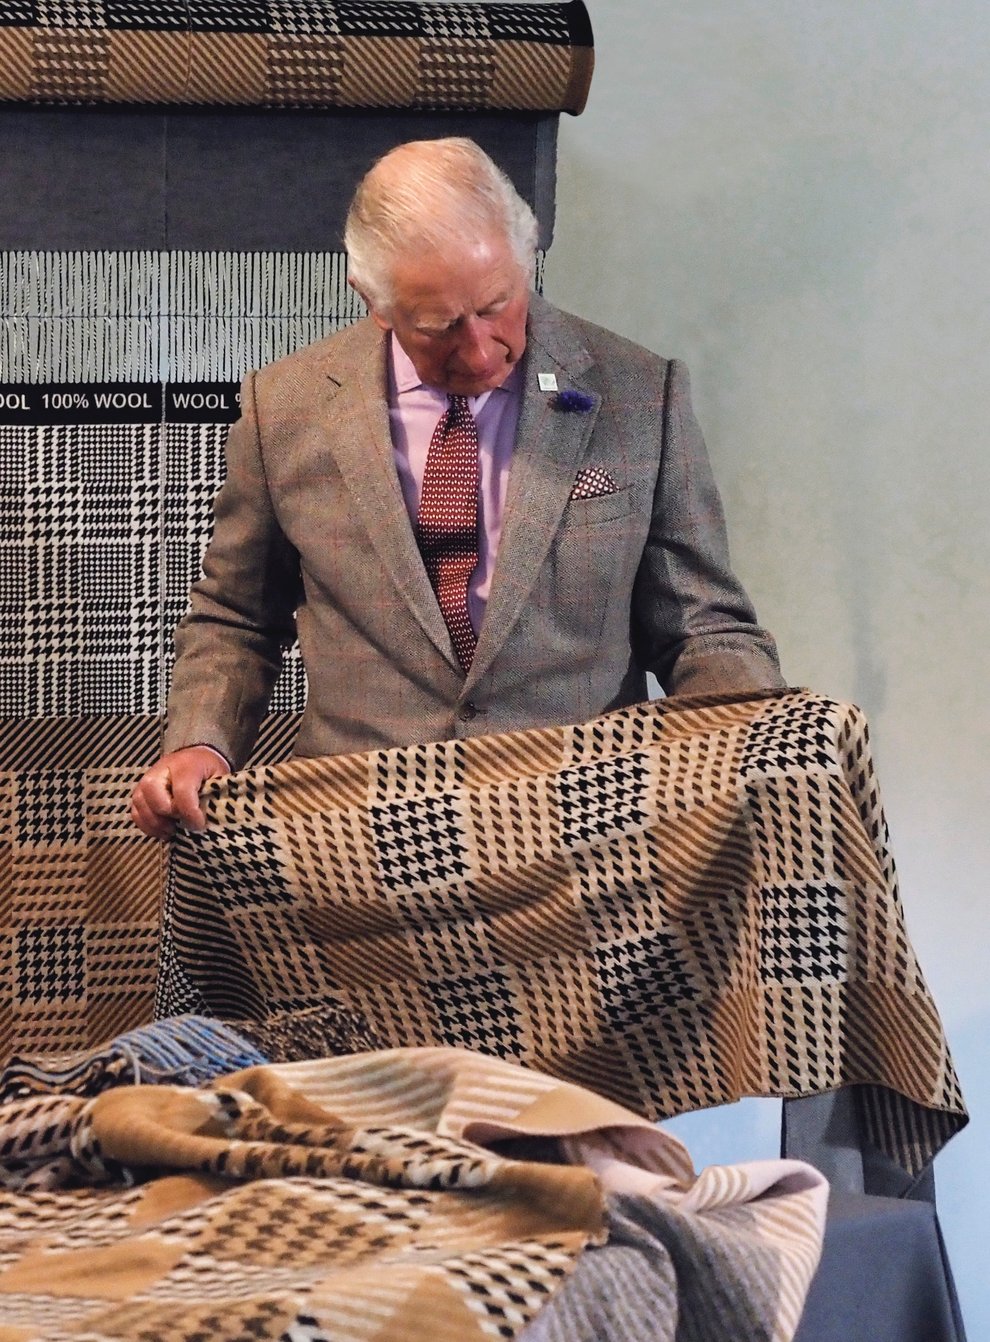 The Prince of Wales' Campaign For Wool is celebrating its 10th anniversary